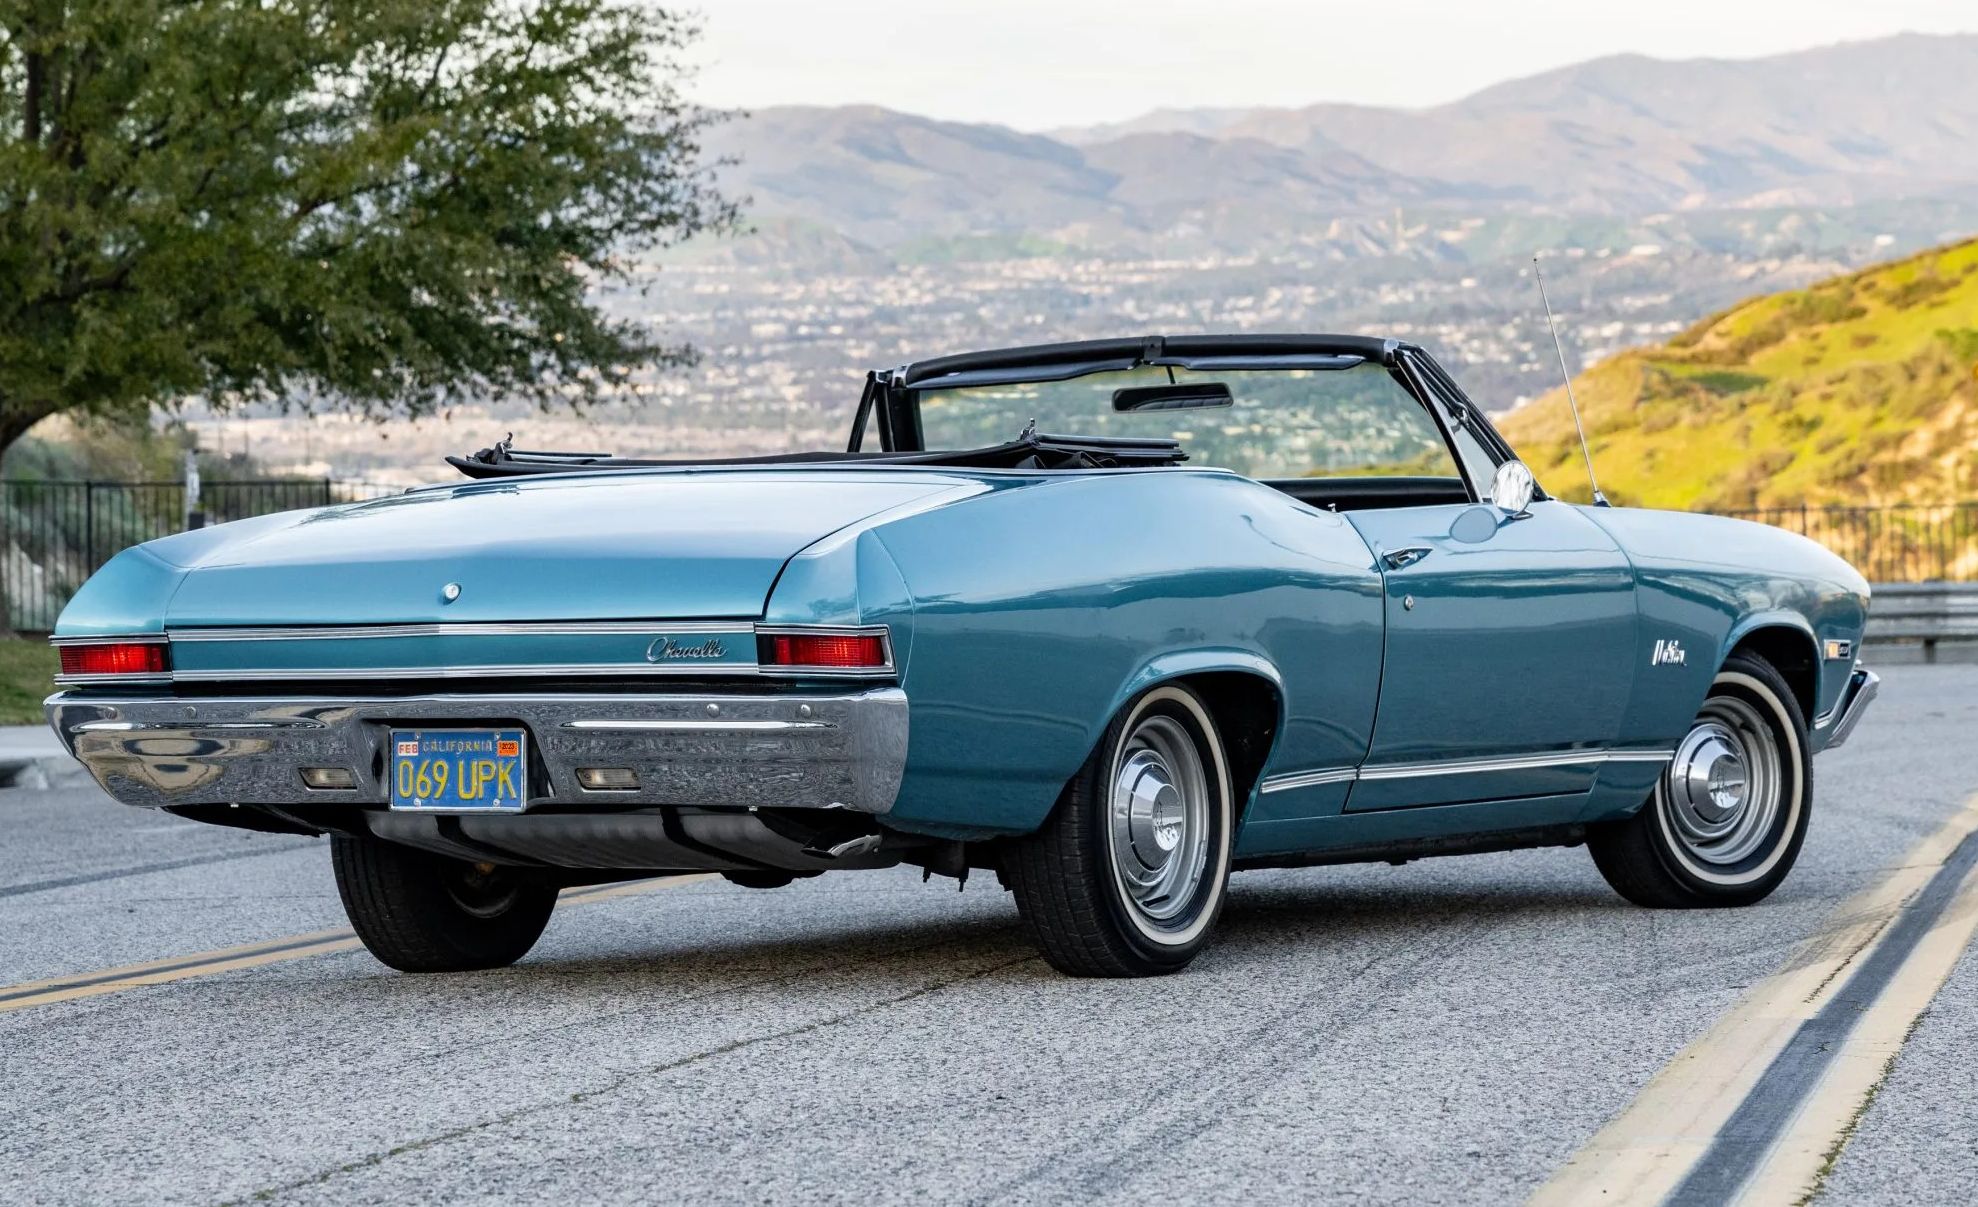 1968 chevrolet malibu rear view with the top down